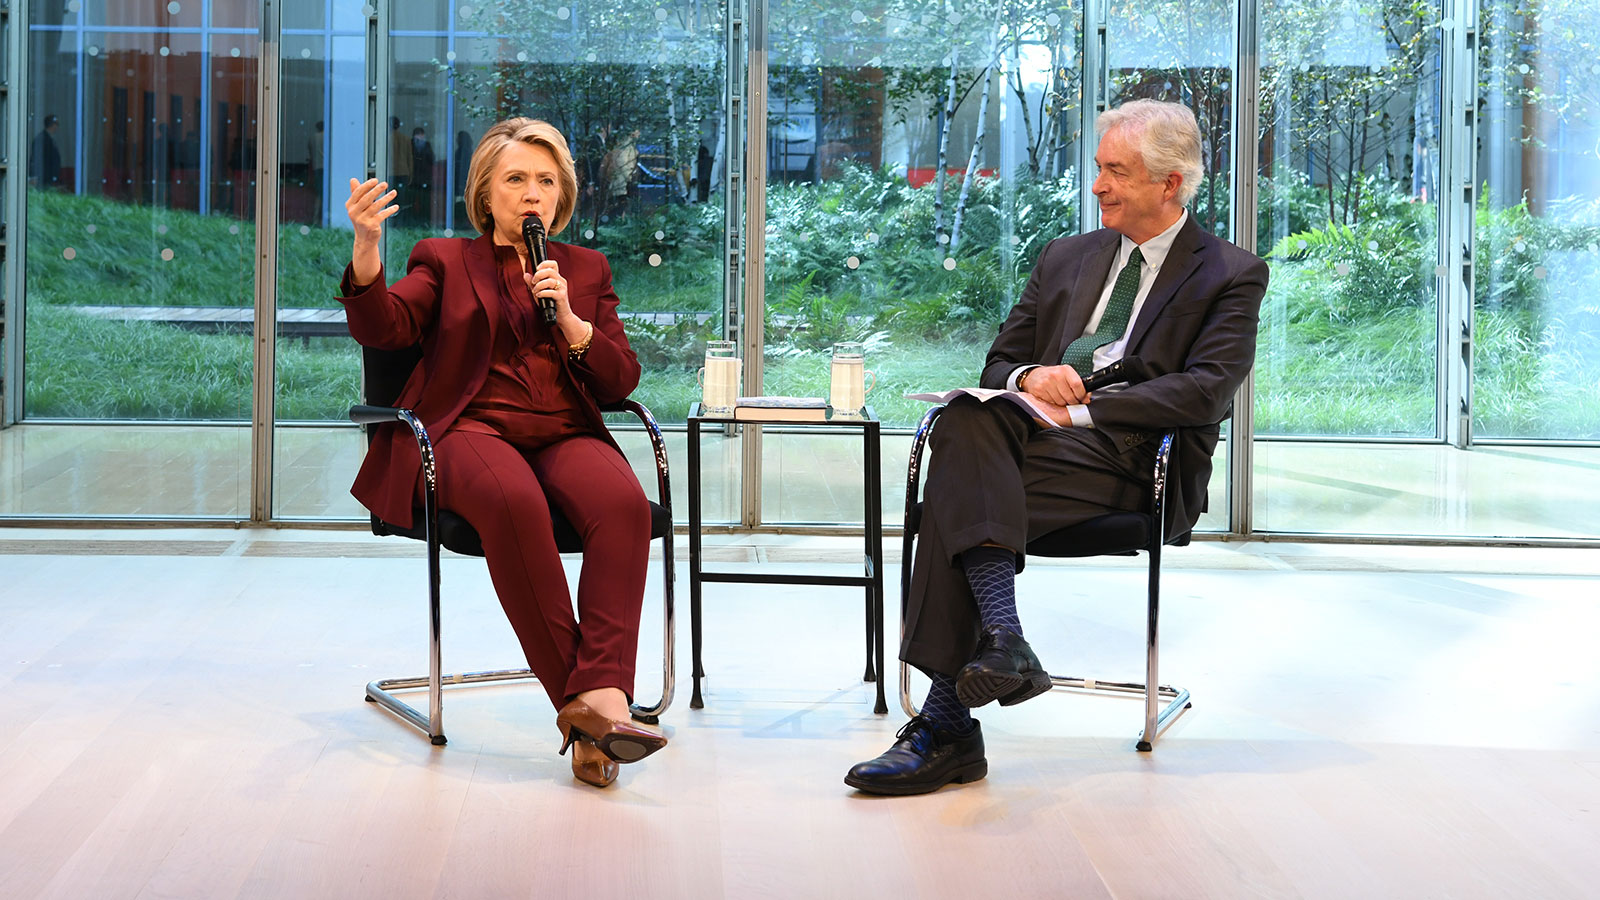 From informed and provocative perspectives, Hillary Rodham Clinton, the former U.S. Secretary of State, discussed the outlook for advancing global peace during a conversation with William J. Burns, president of the Carnegie Endowment for International Peace.